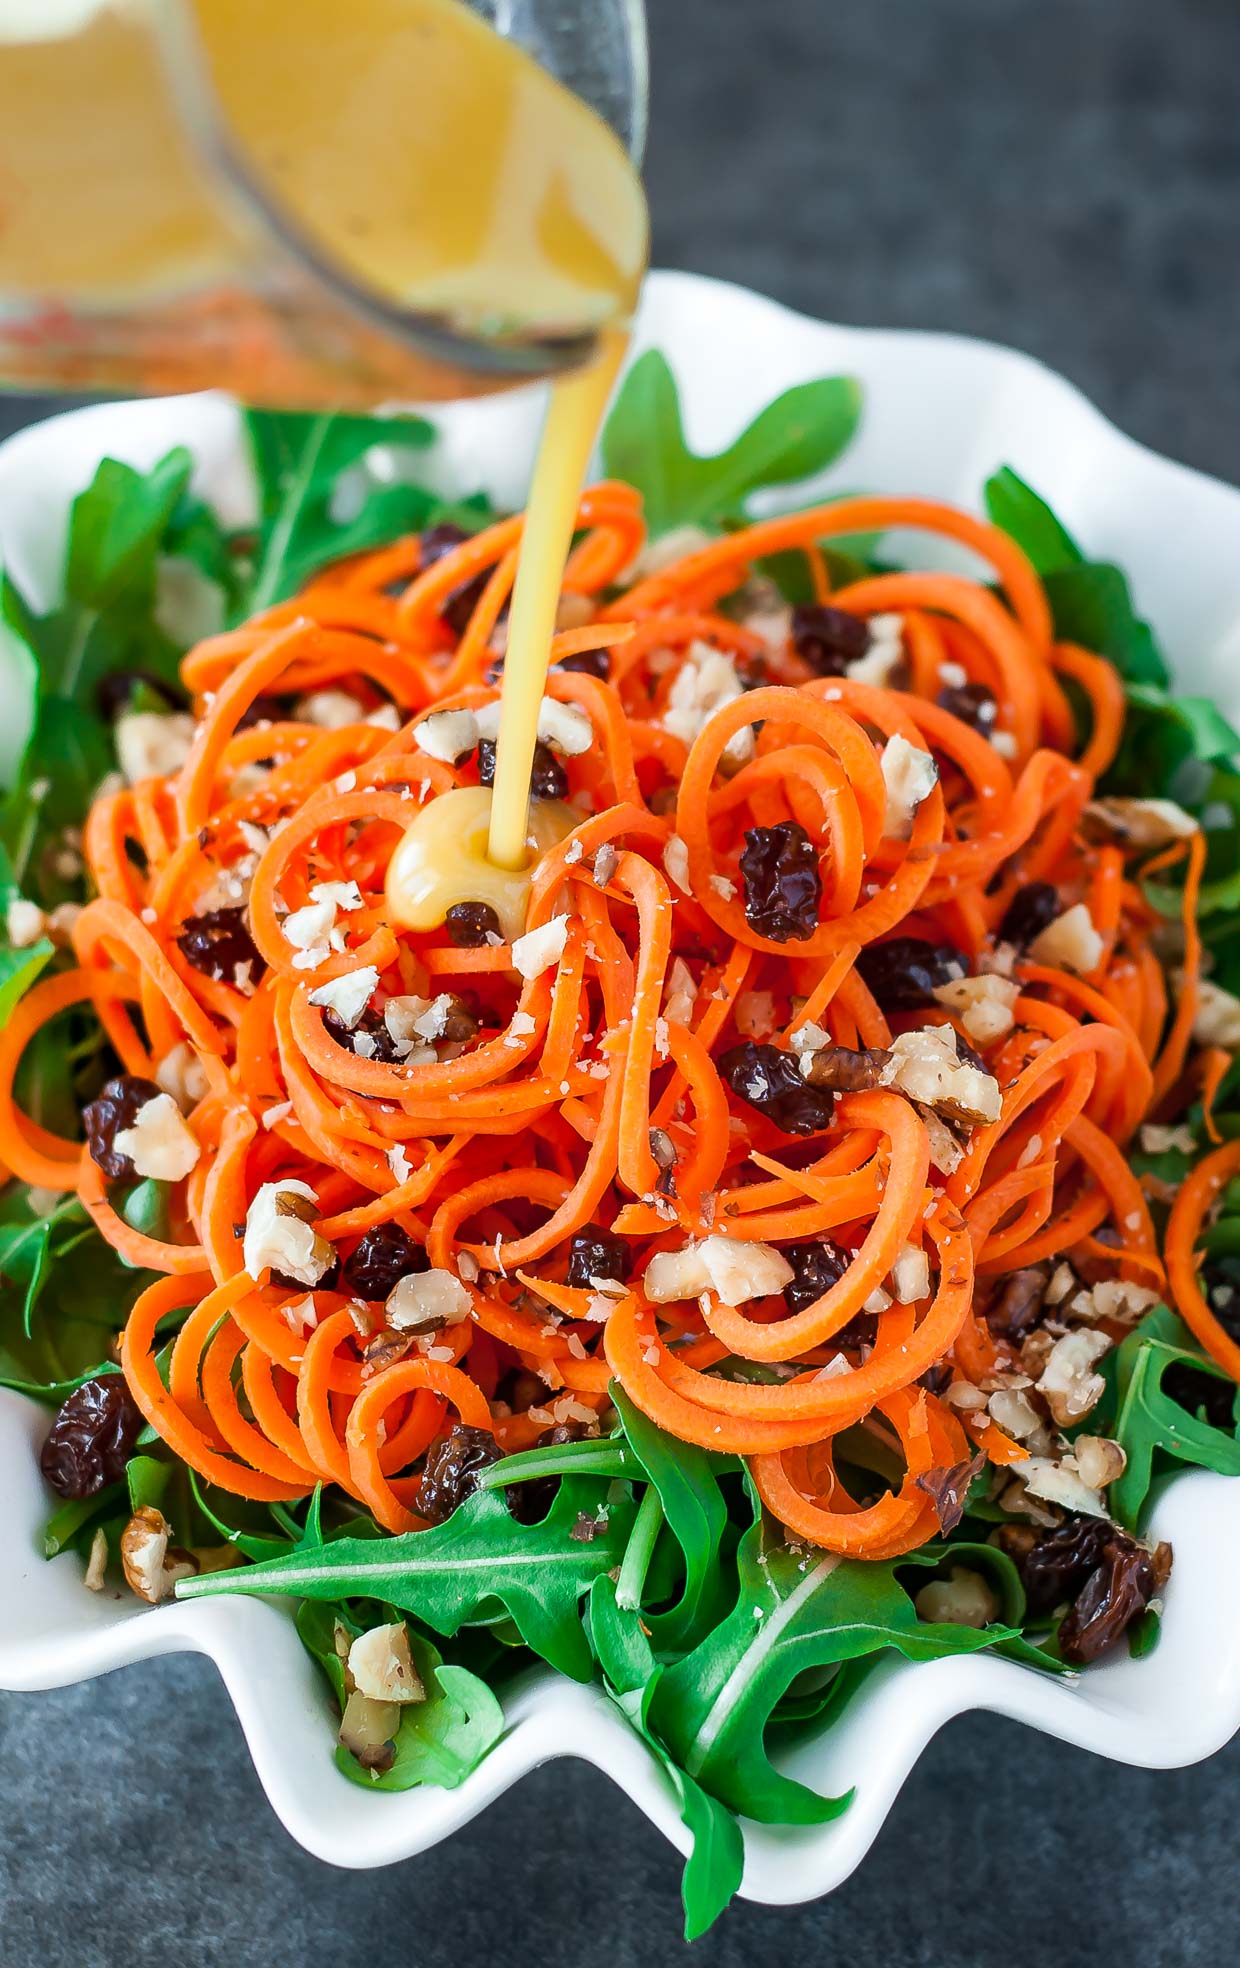 Healthy Carrot Salad - Spiralized or Shredded! - Peas and Crayons